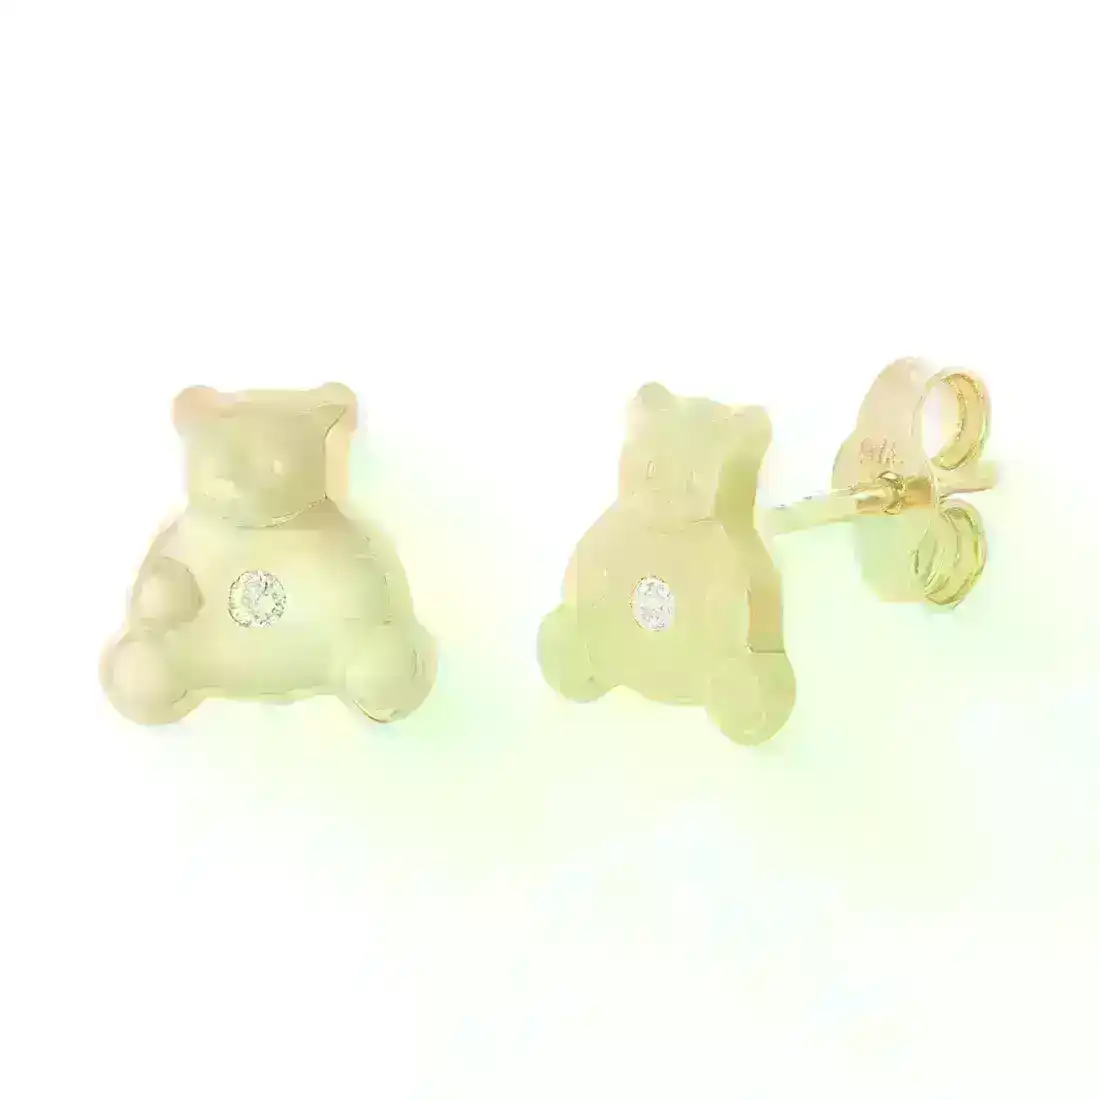 Childrens Teddy Bear Stud Earrings in 9ct Yellow Gold